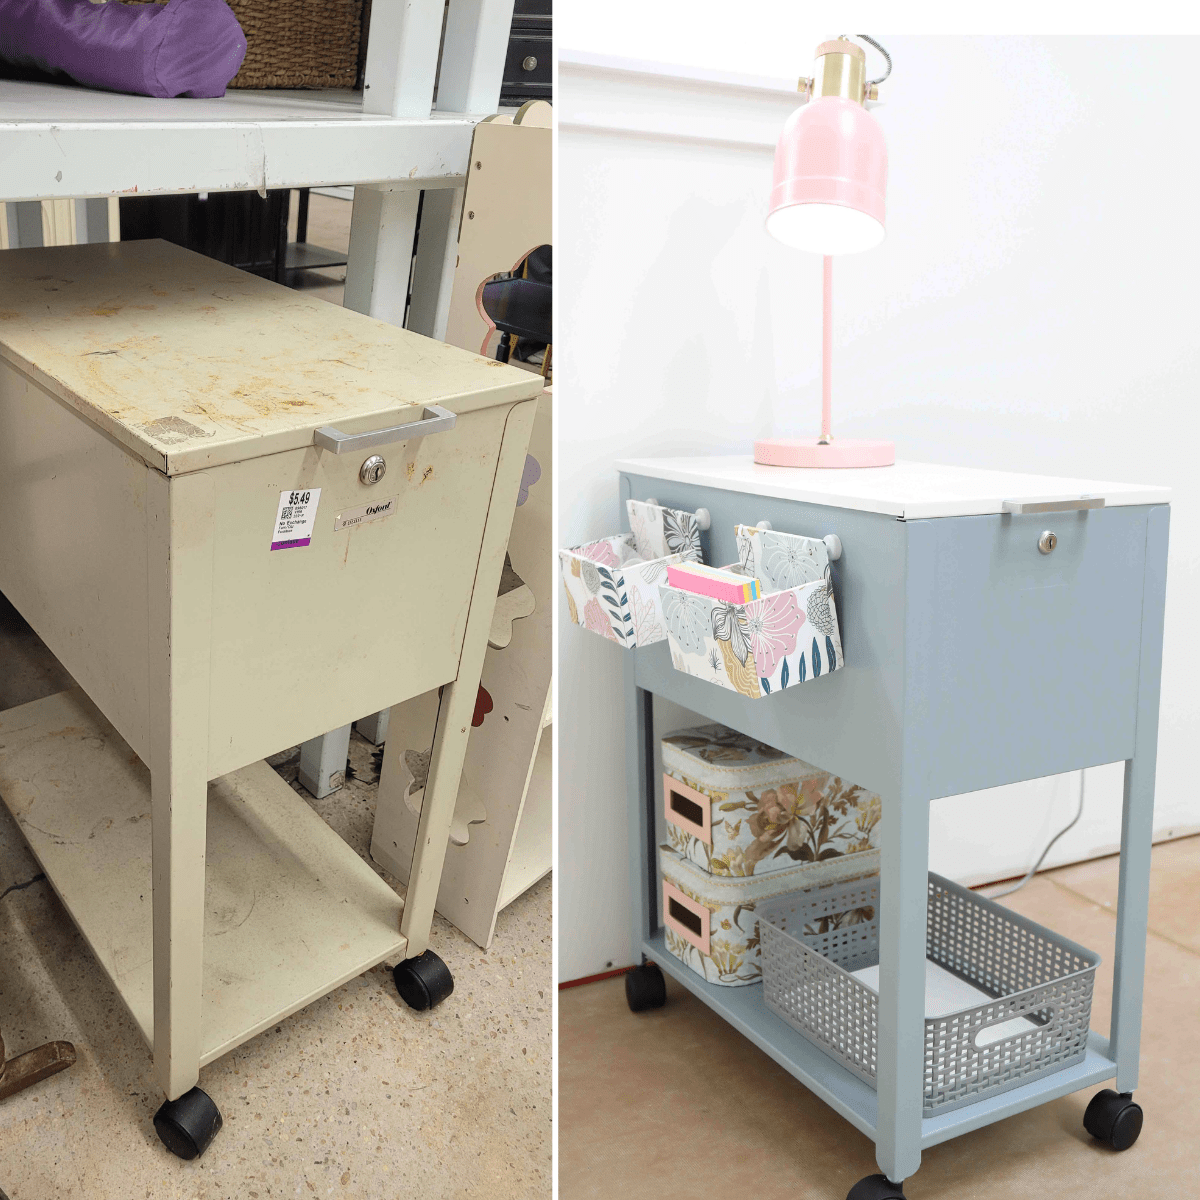 BEFORE & AFTER: How to Paint a File Cabinet Using Furniture Paint